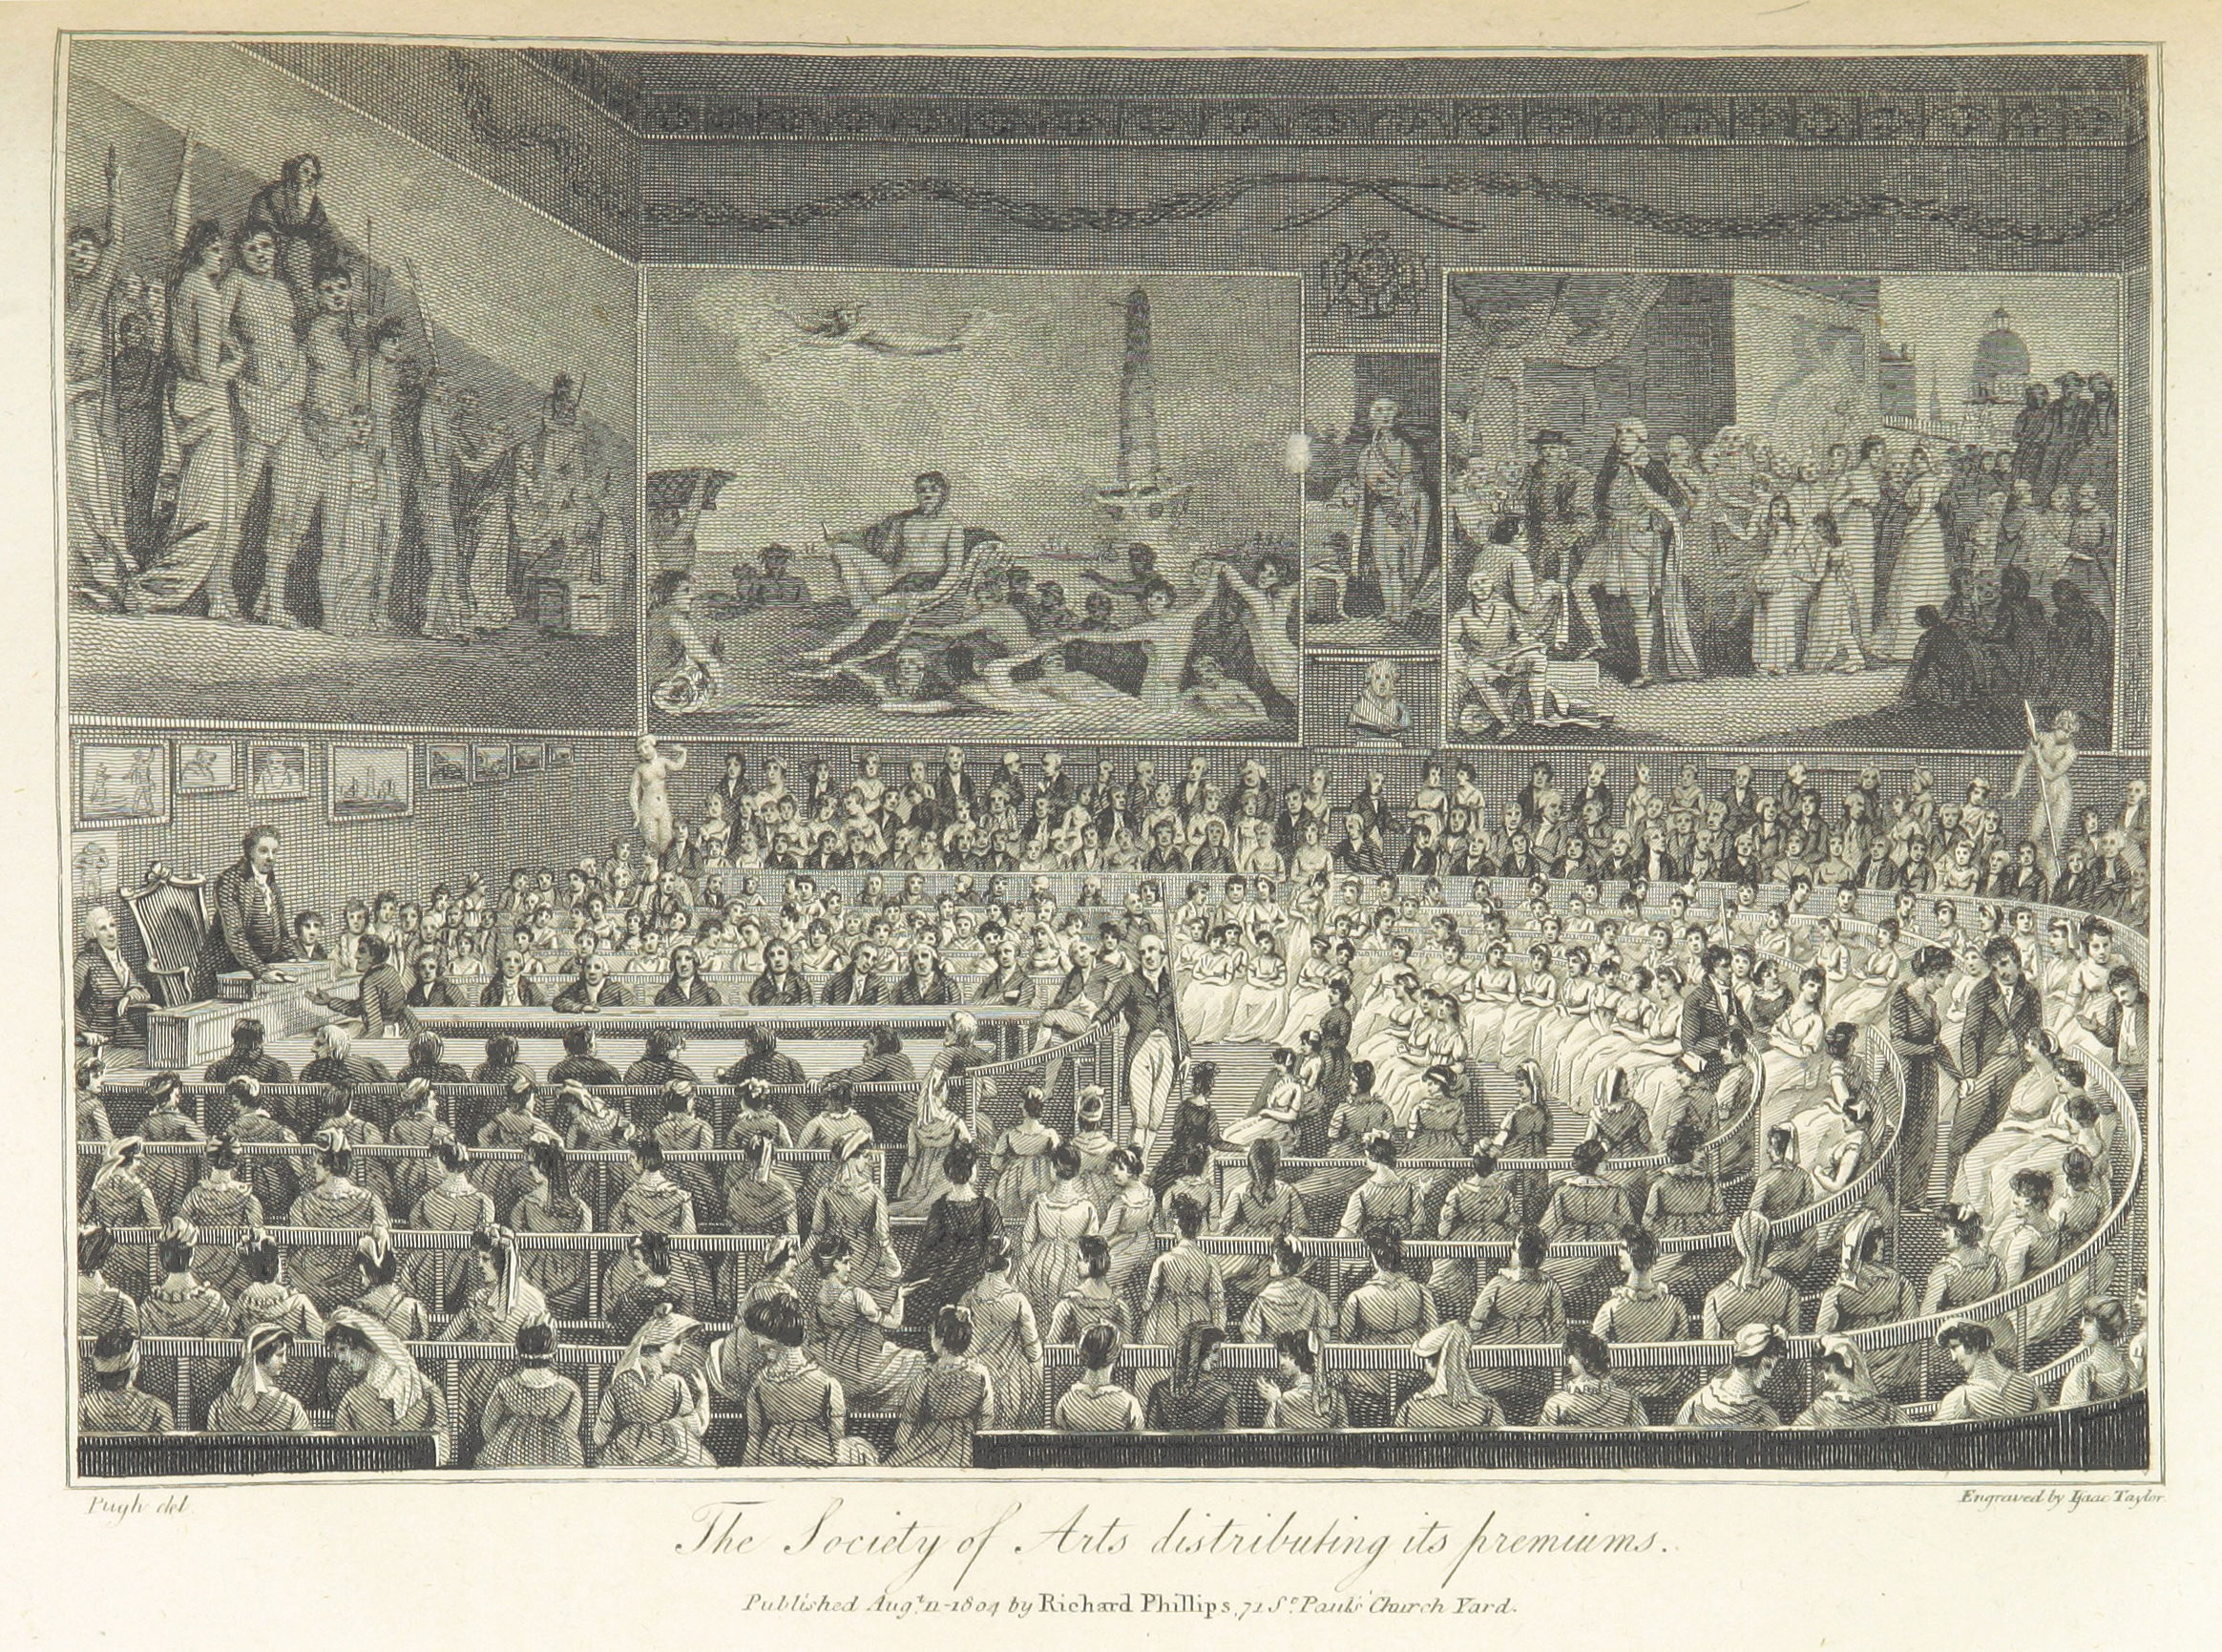 Phillips(1804)_p447_-_The_Society_of_Arts_distributing_its_premiums